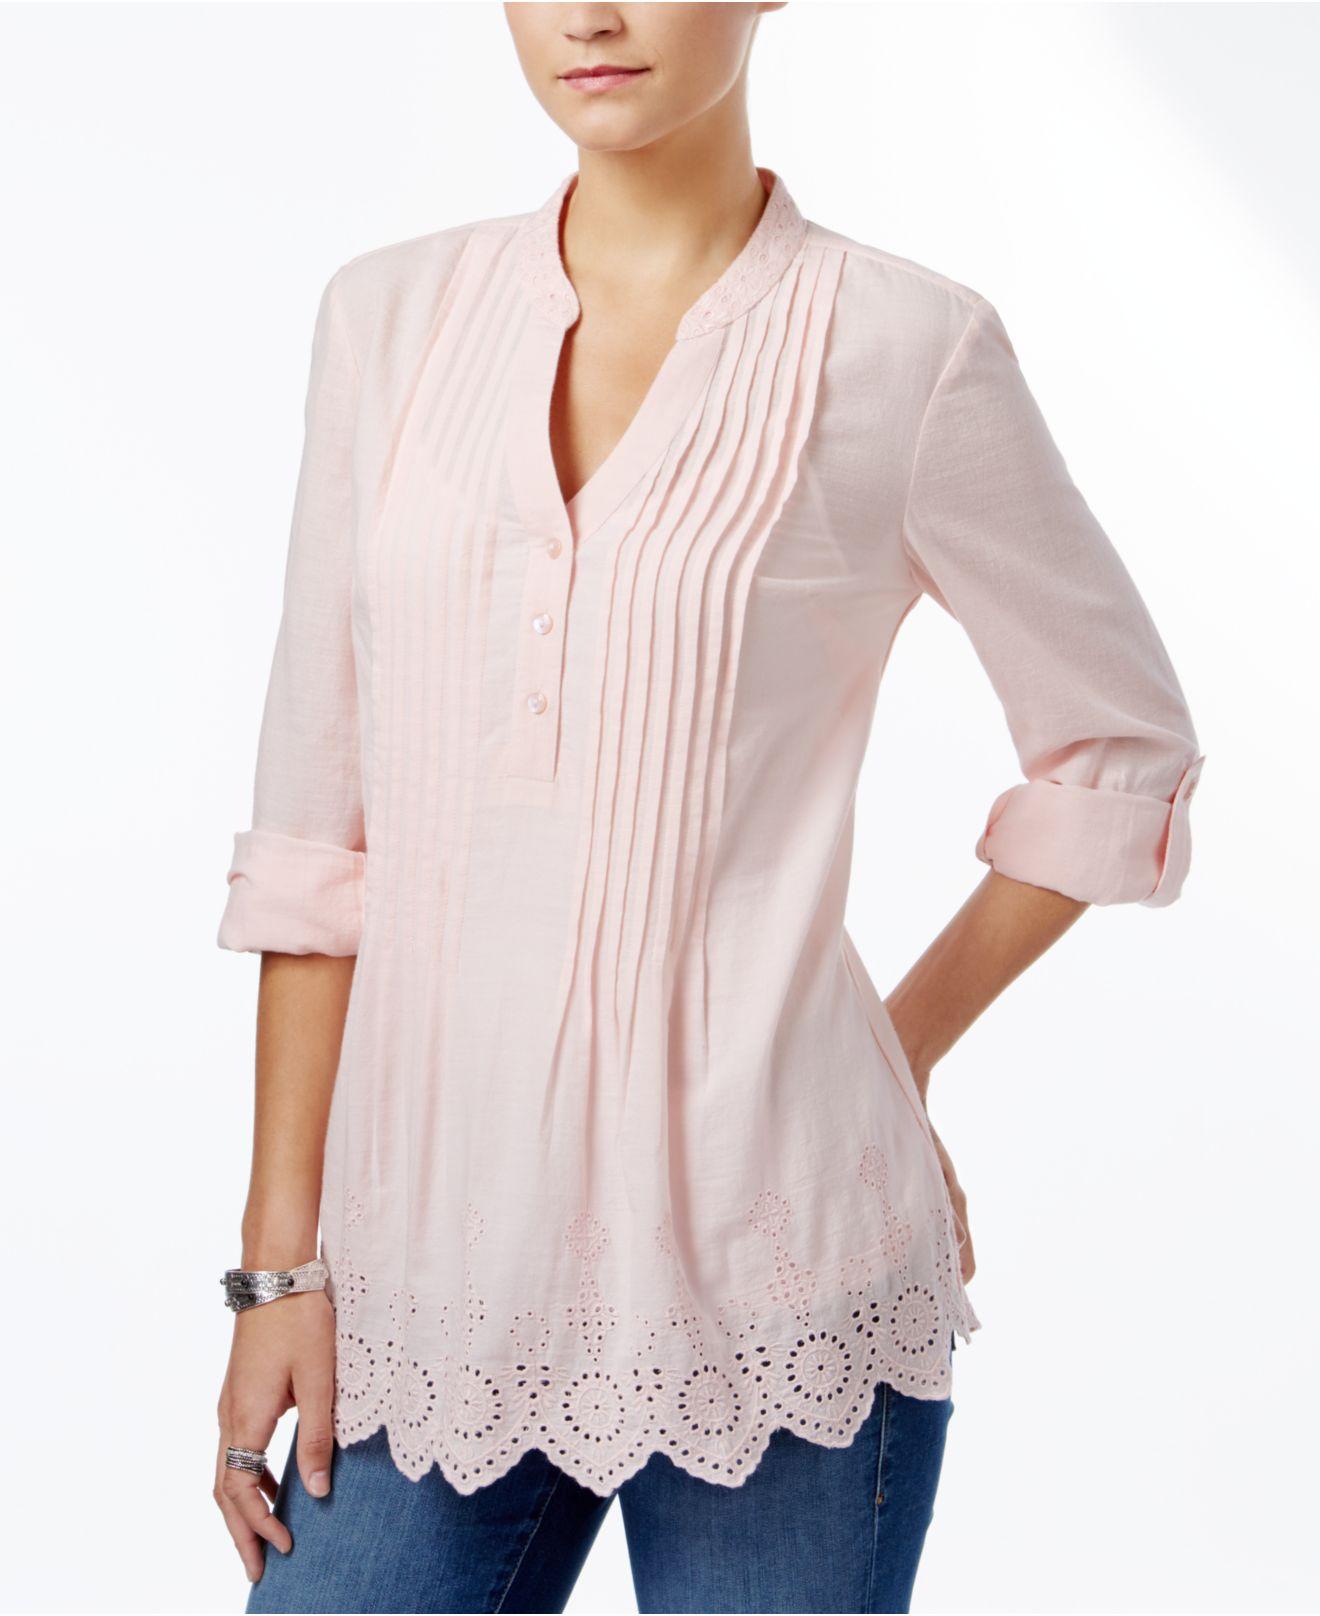 Lyst - Style & Co. Cotton Pleated Eyelet-hem Top in Pink